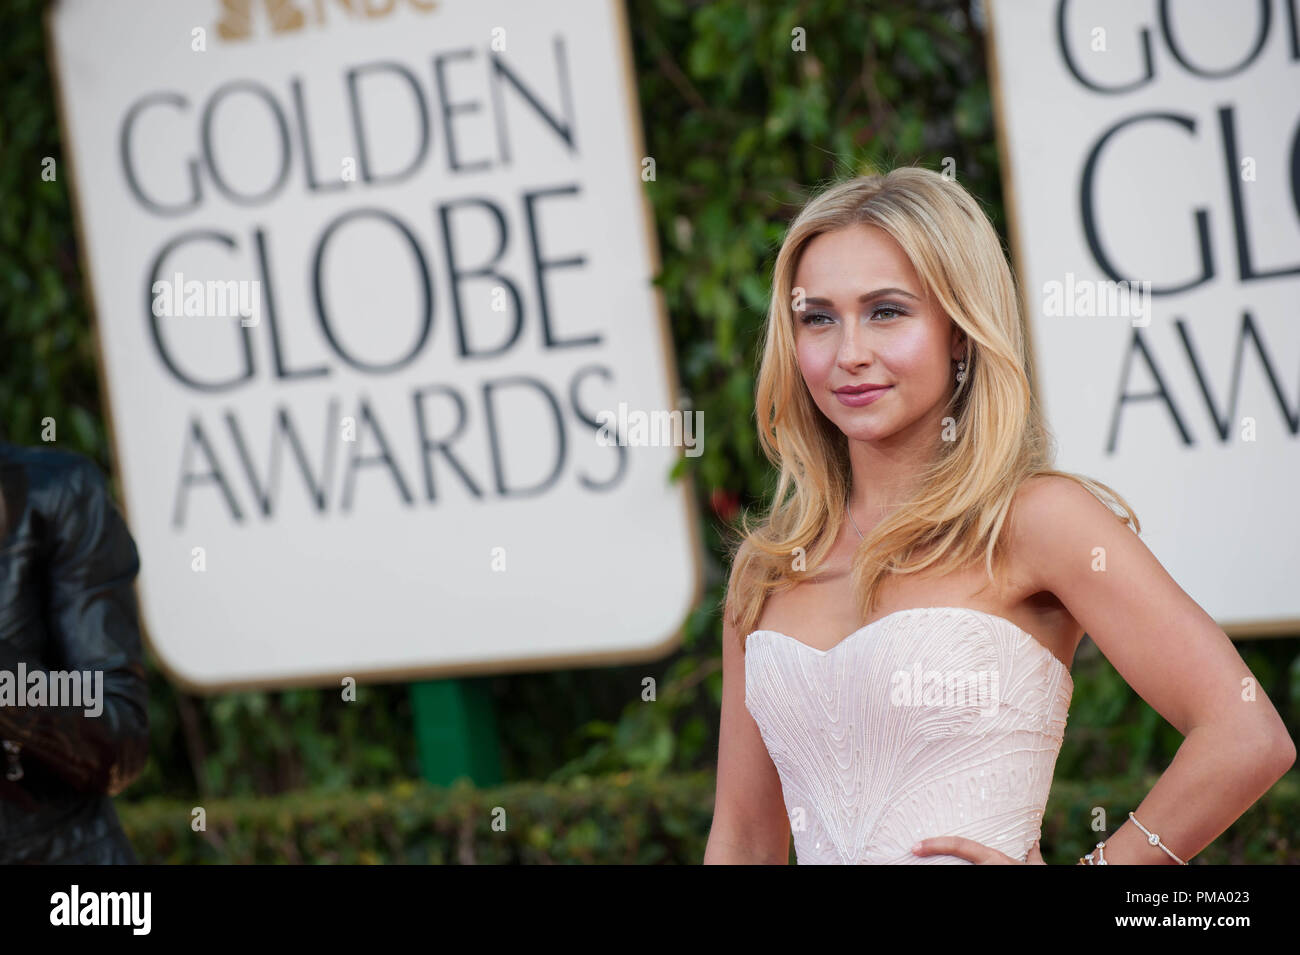 Nominated for BEST PERFORMANCE BY AN ACTRESS IN A SUPPORTING ROLE IN A SERIES, MINI-SERIES OR MOTION PICTURE MADE FOR TELEVISION for her role in “NASHVILLE”, actress Hayden Panettiere attends the 70th Annual Golden Globe Awards at the Beverly Hilton in Beverly Hills, CA on Sunday, January 13, 2013. Stock Photo